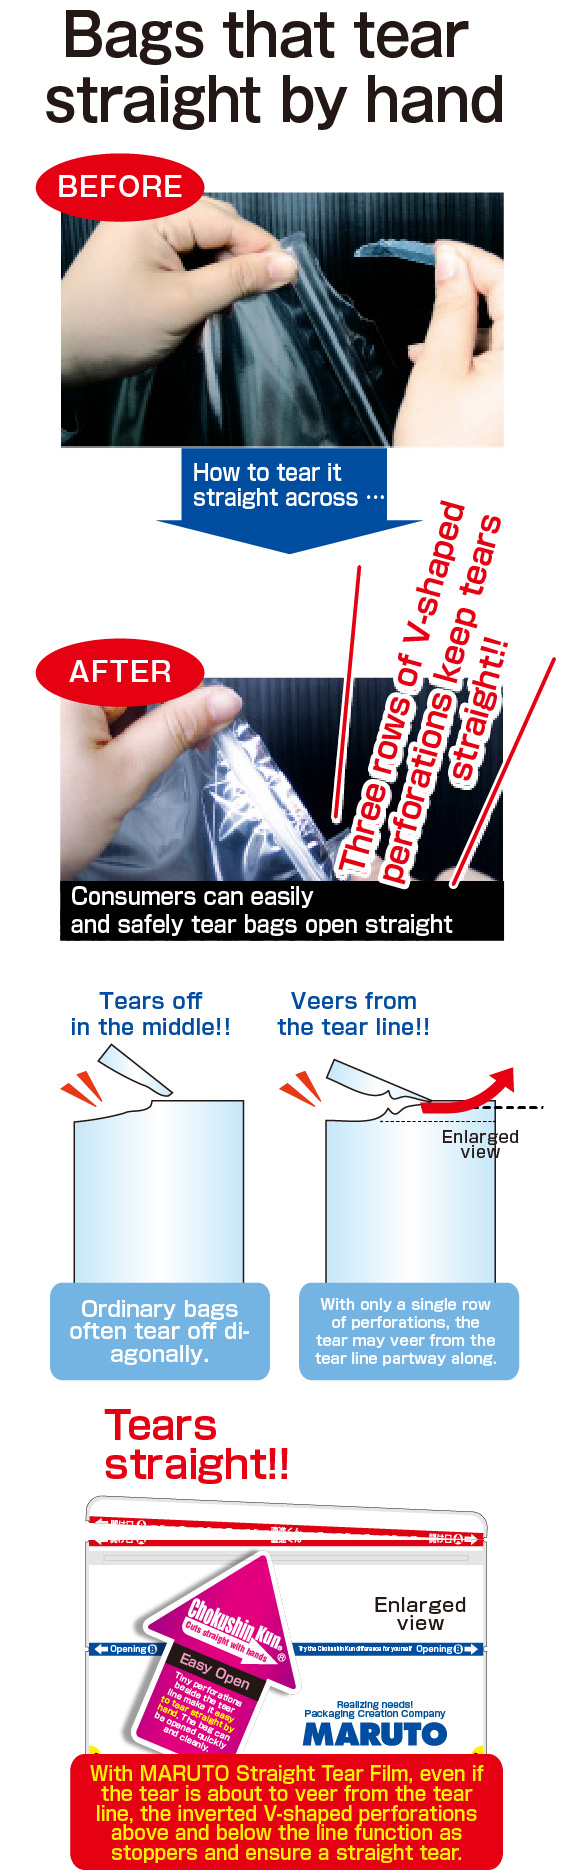 Bags that tear straight by hand